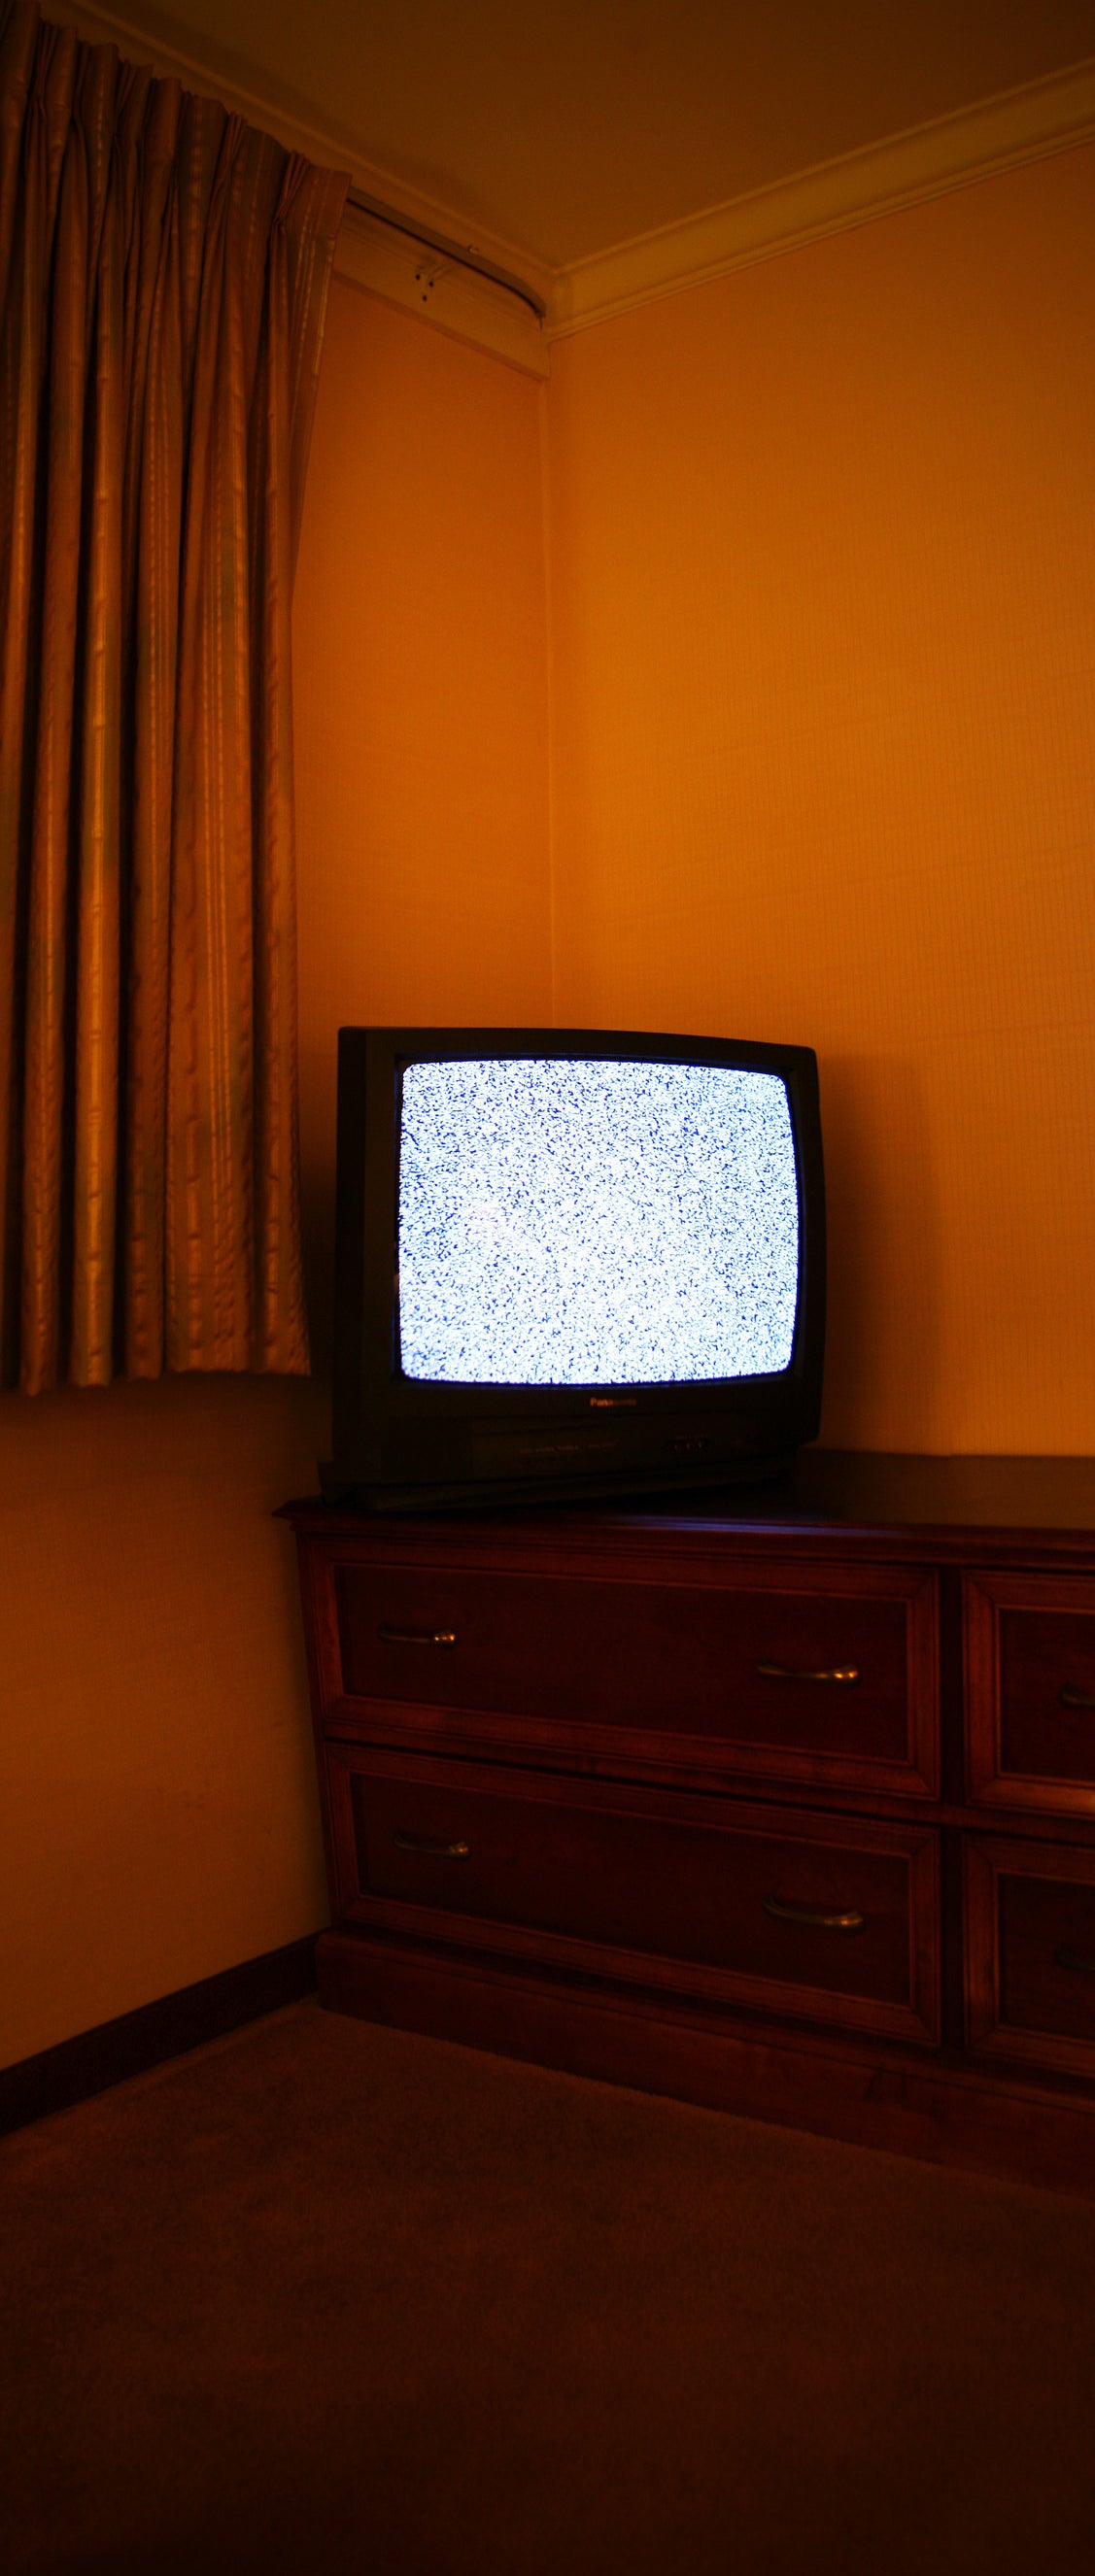 static on tv